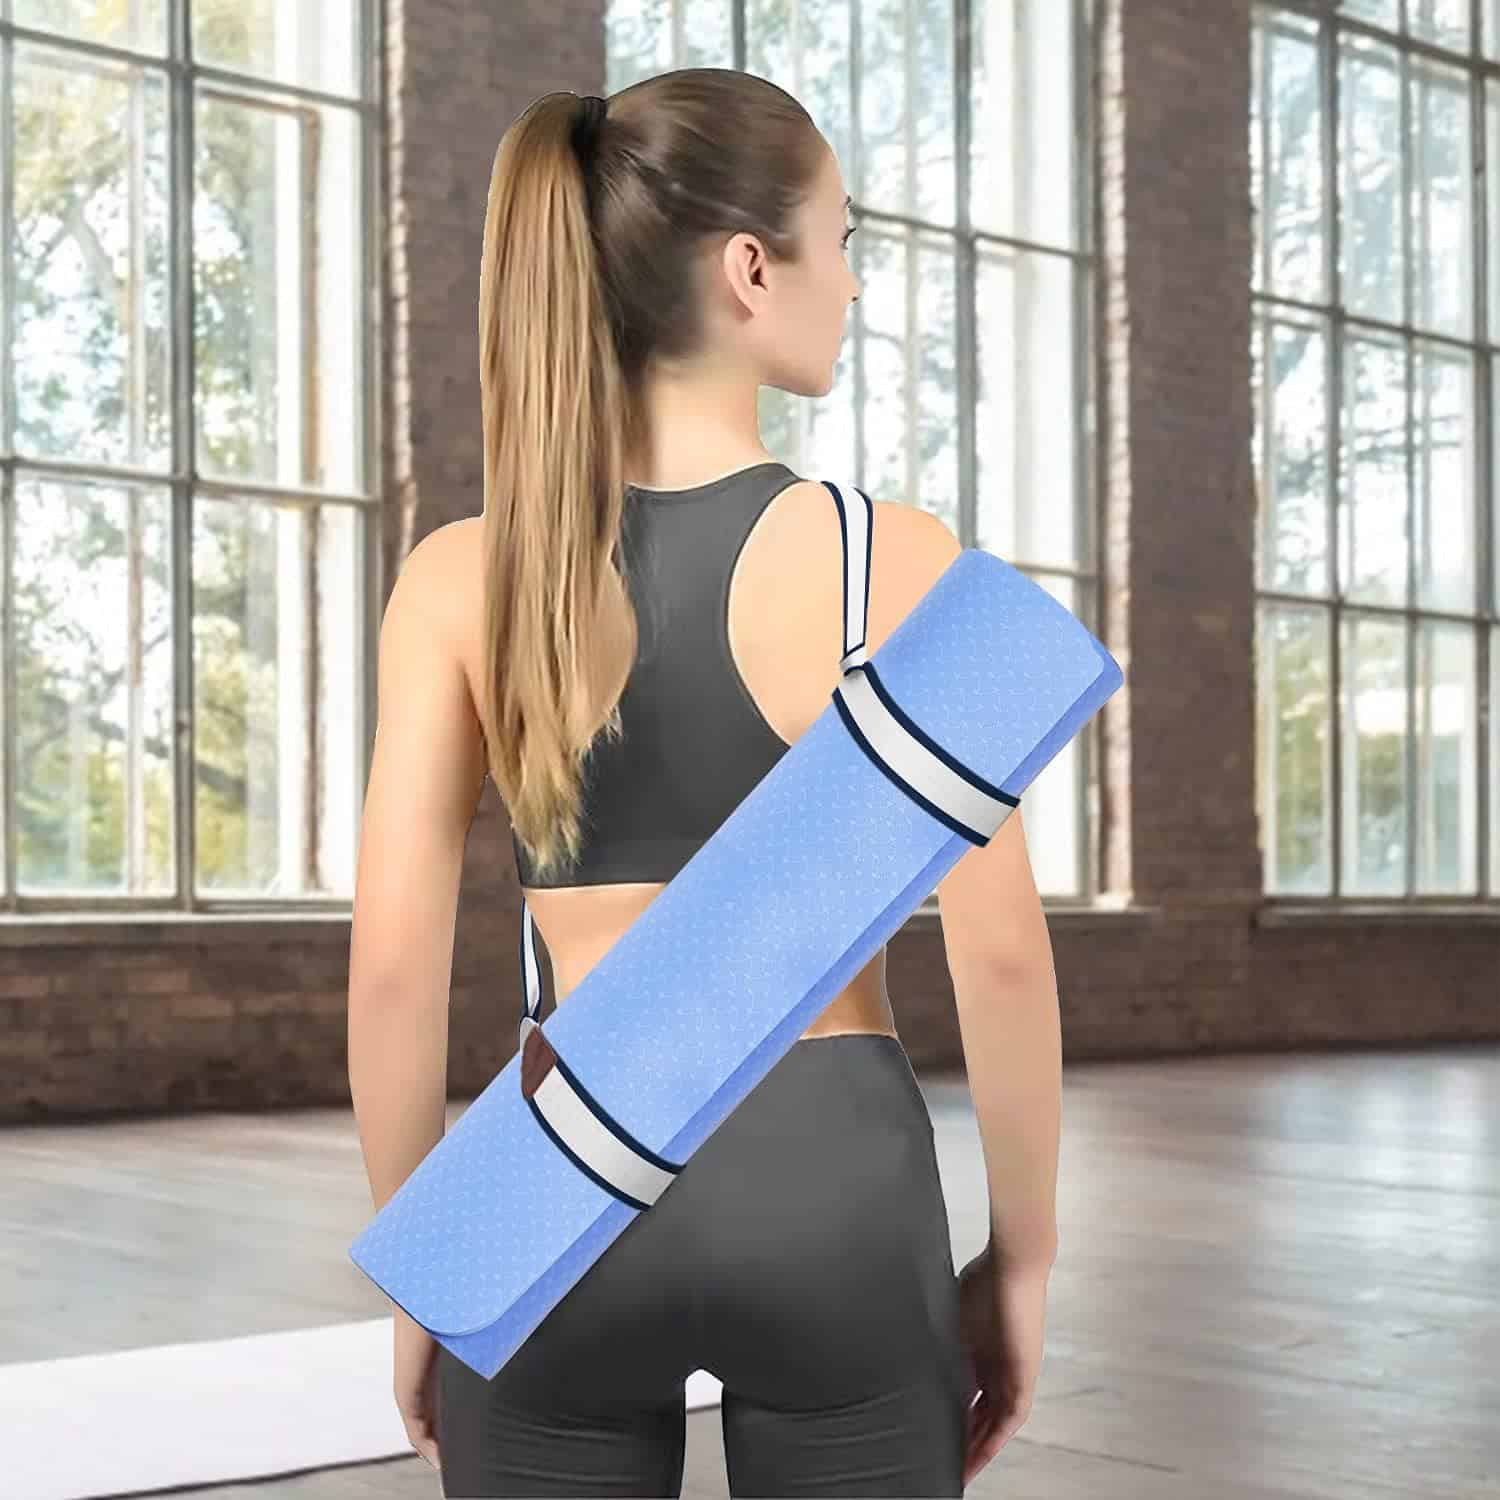 Yoga Mat Strap/Sling Adjustable Yoga/Exercise Mat Carrier - A Review